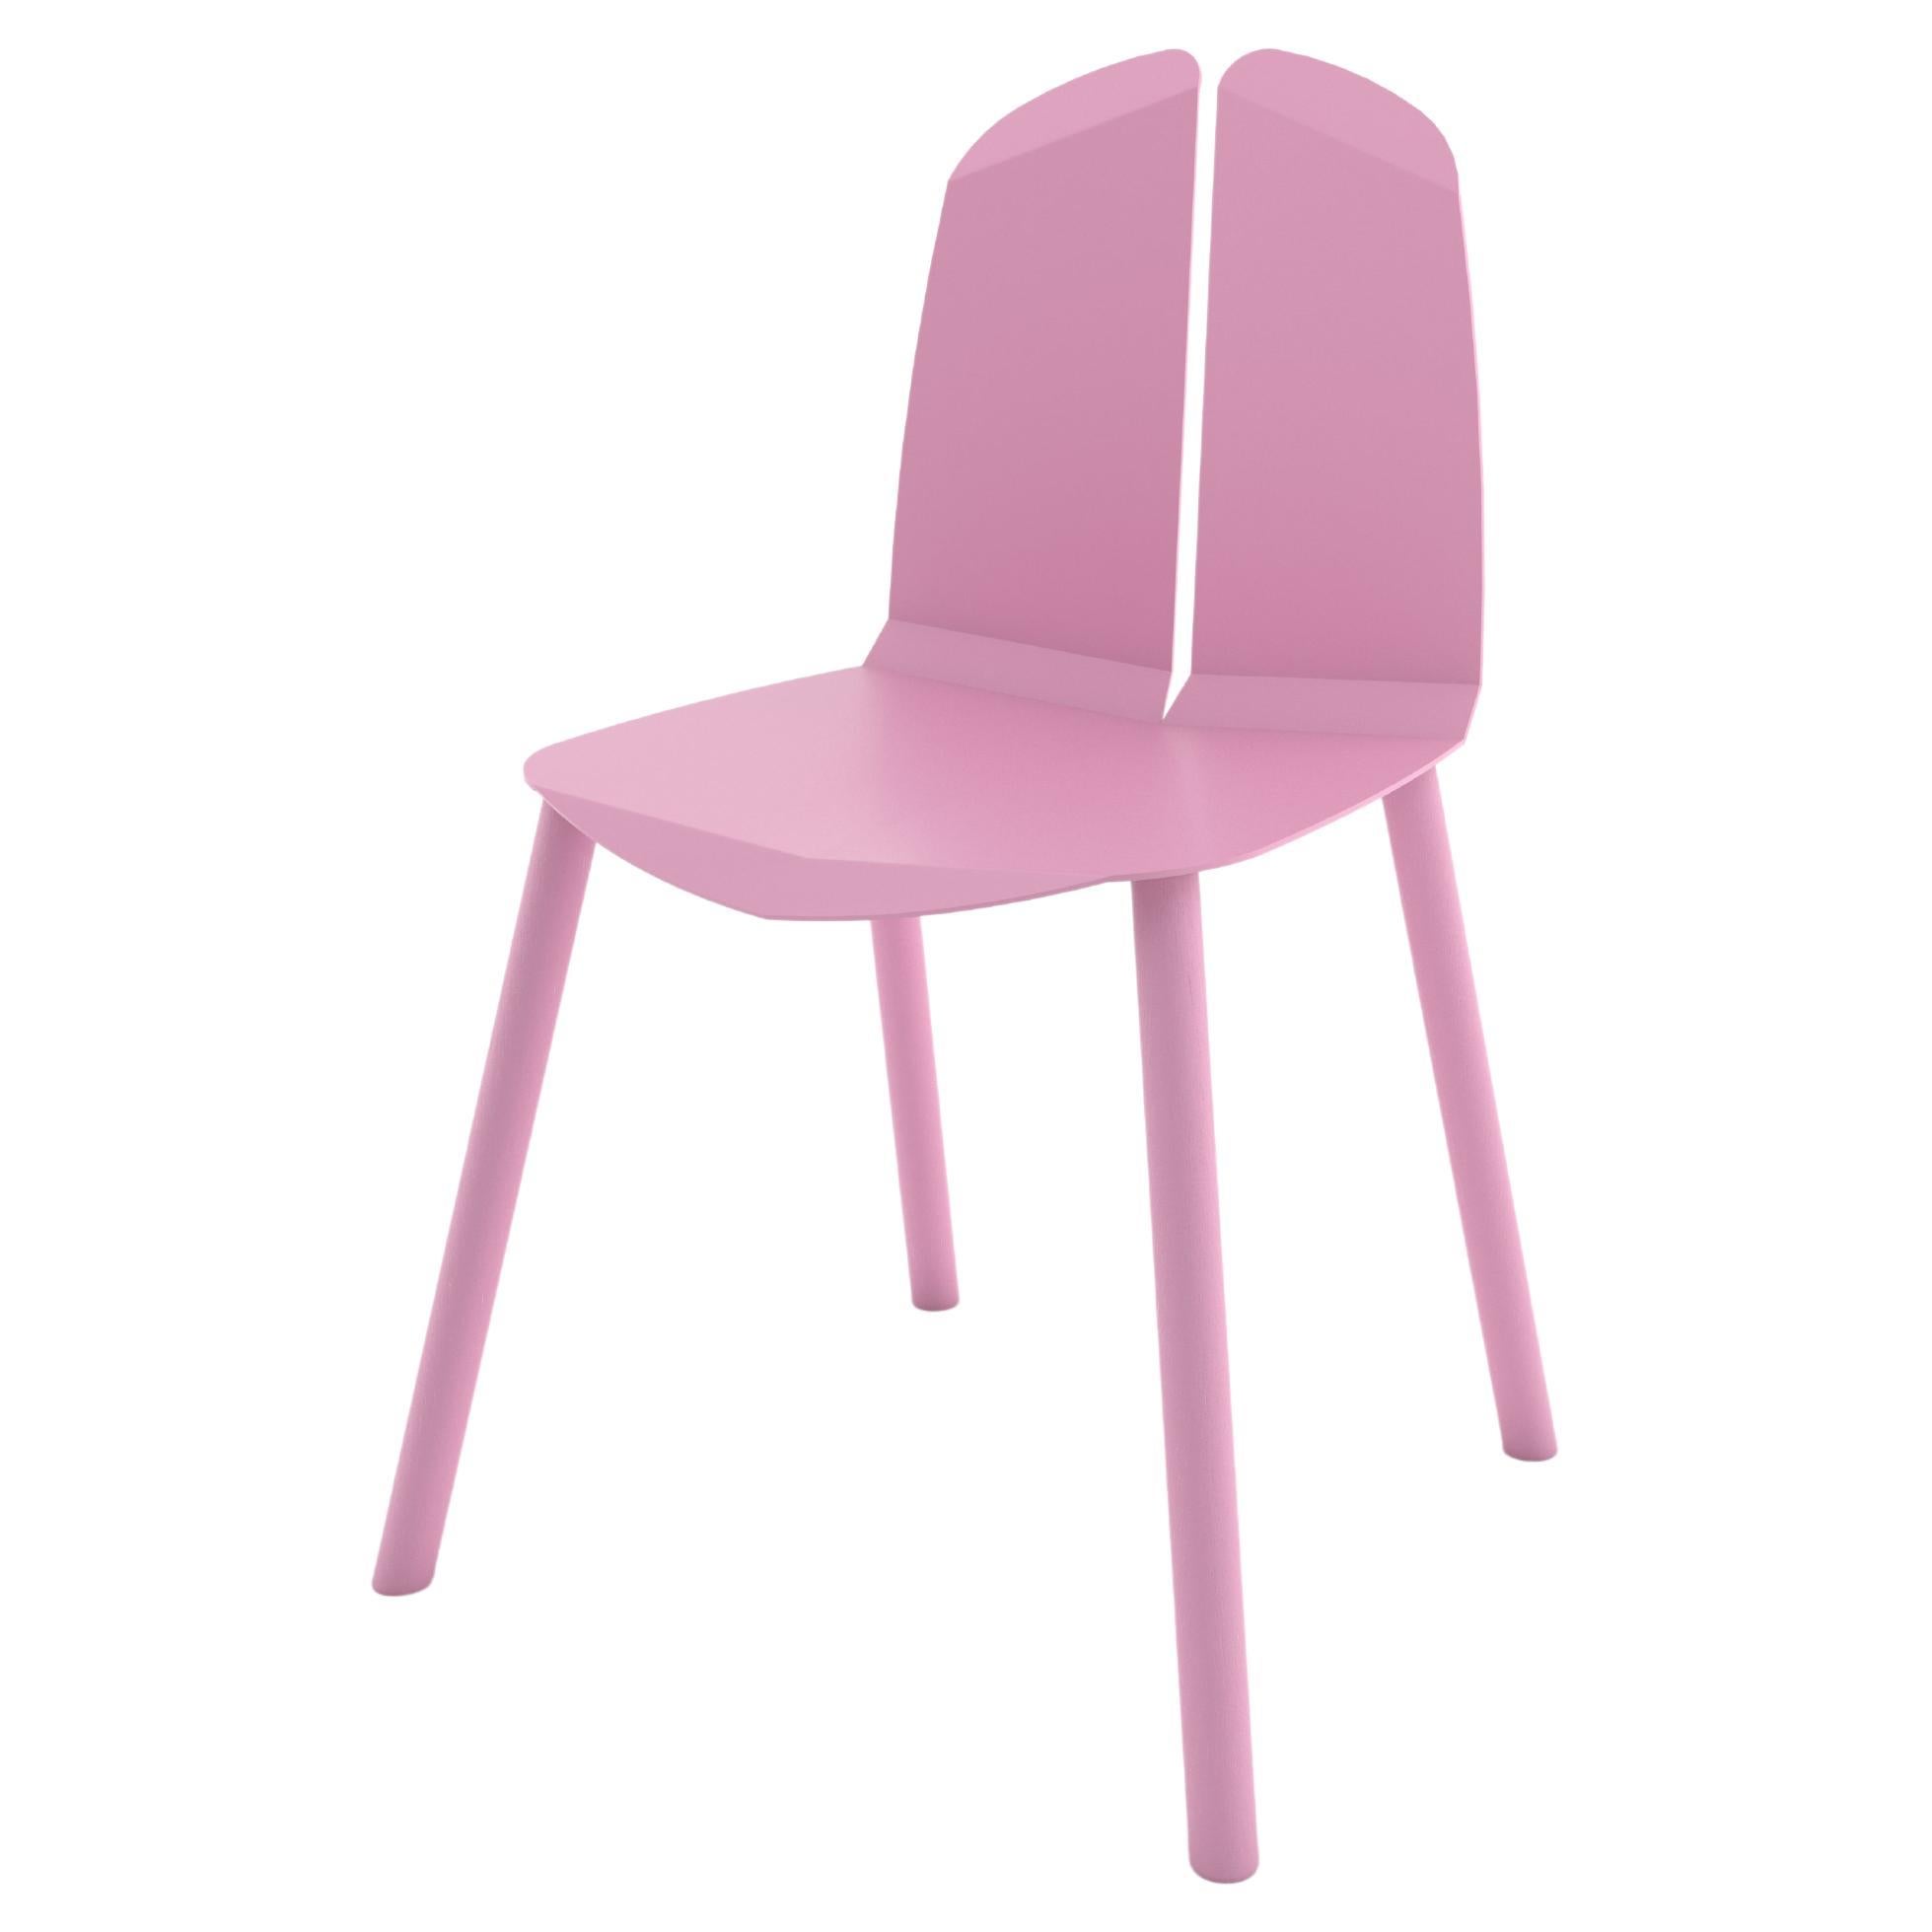 Noa Chair Pink For Sale